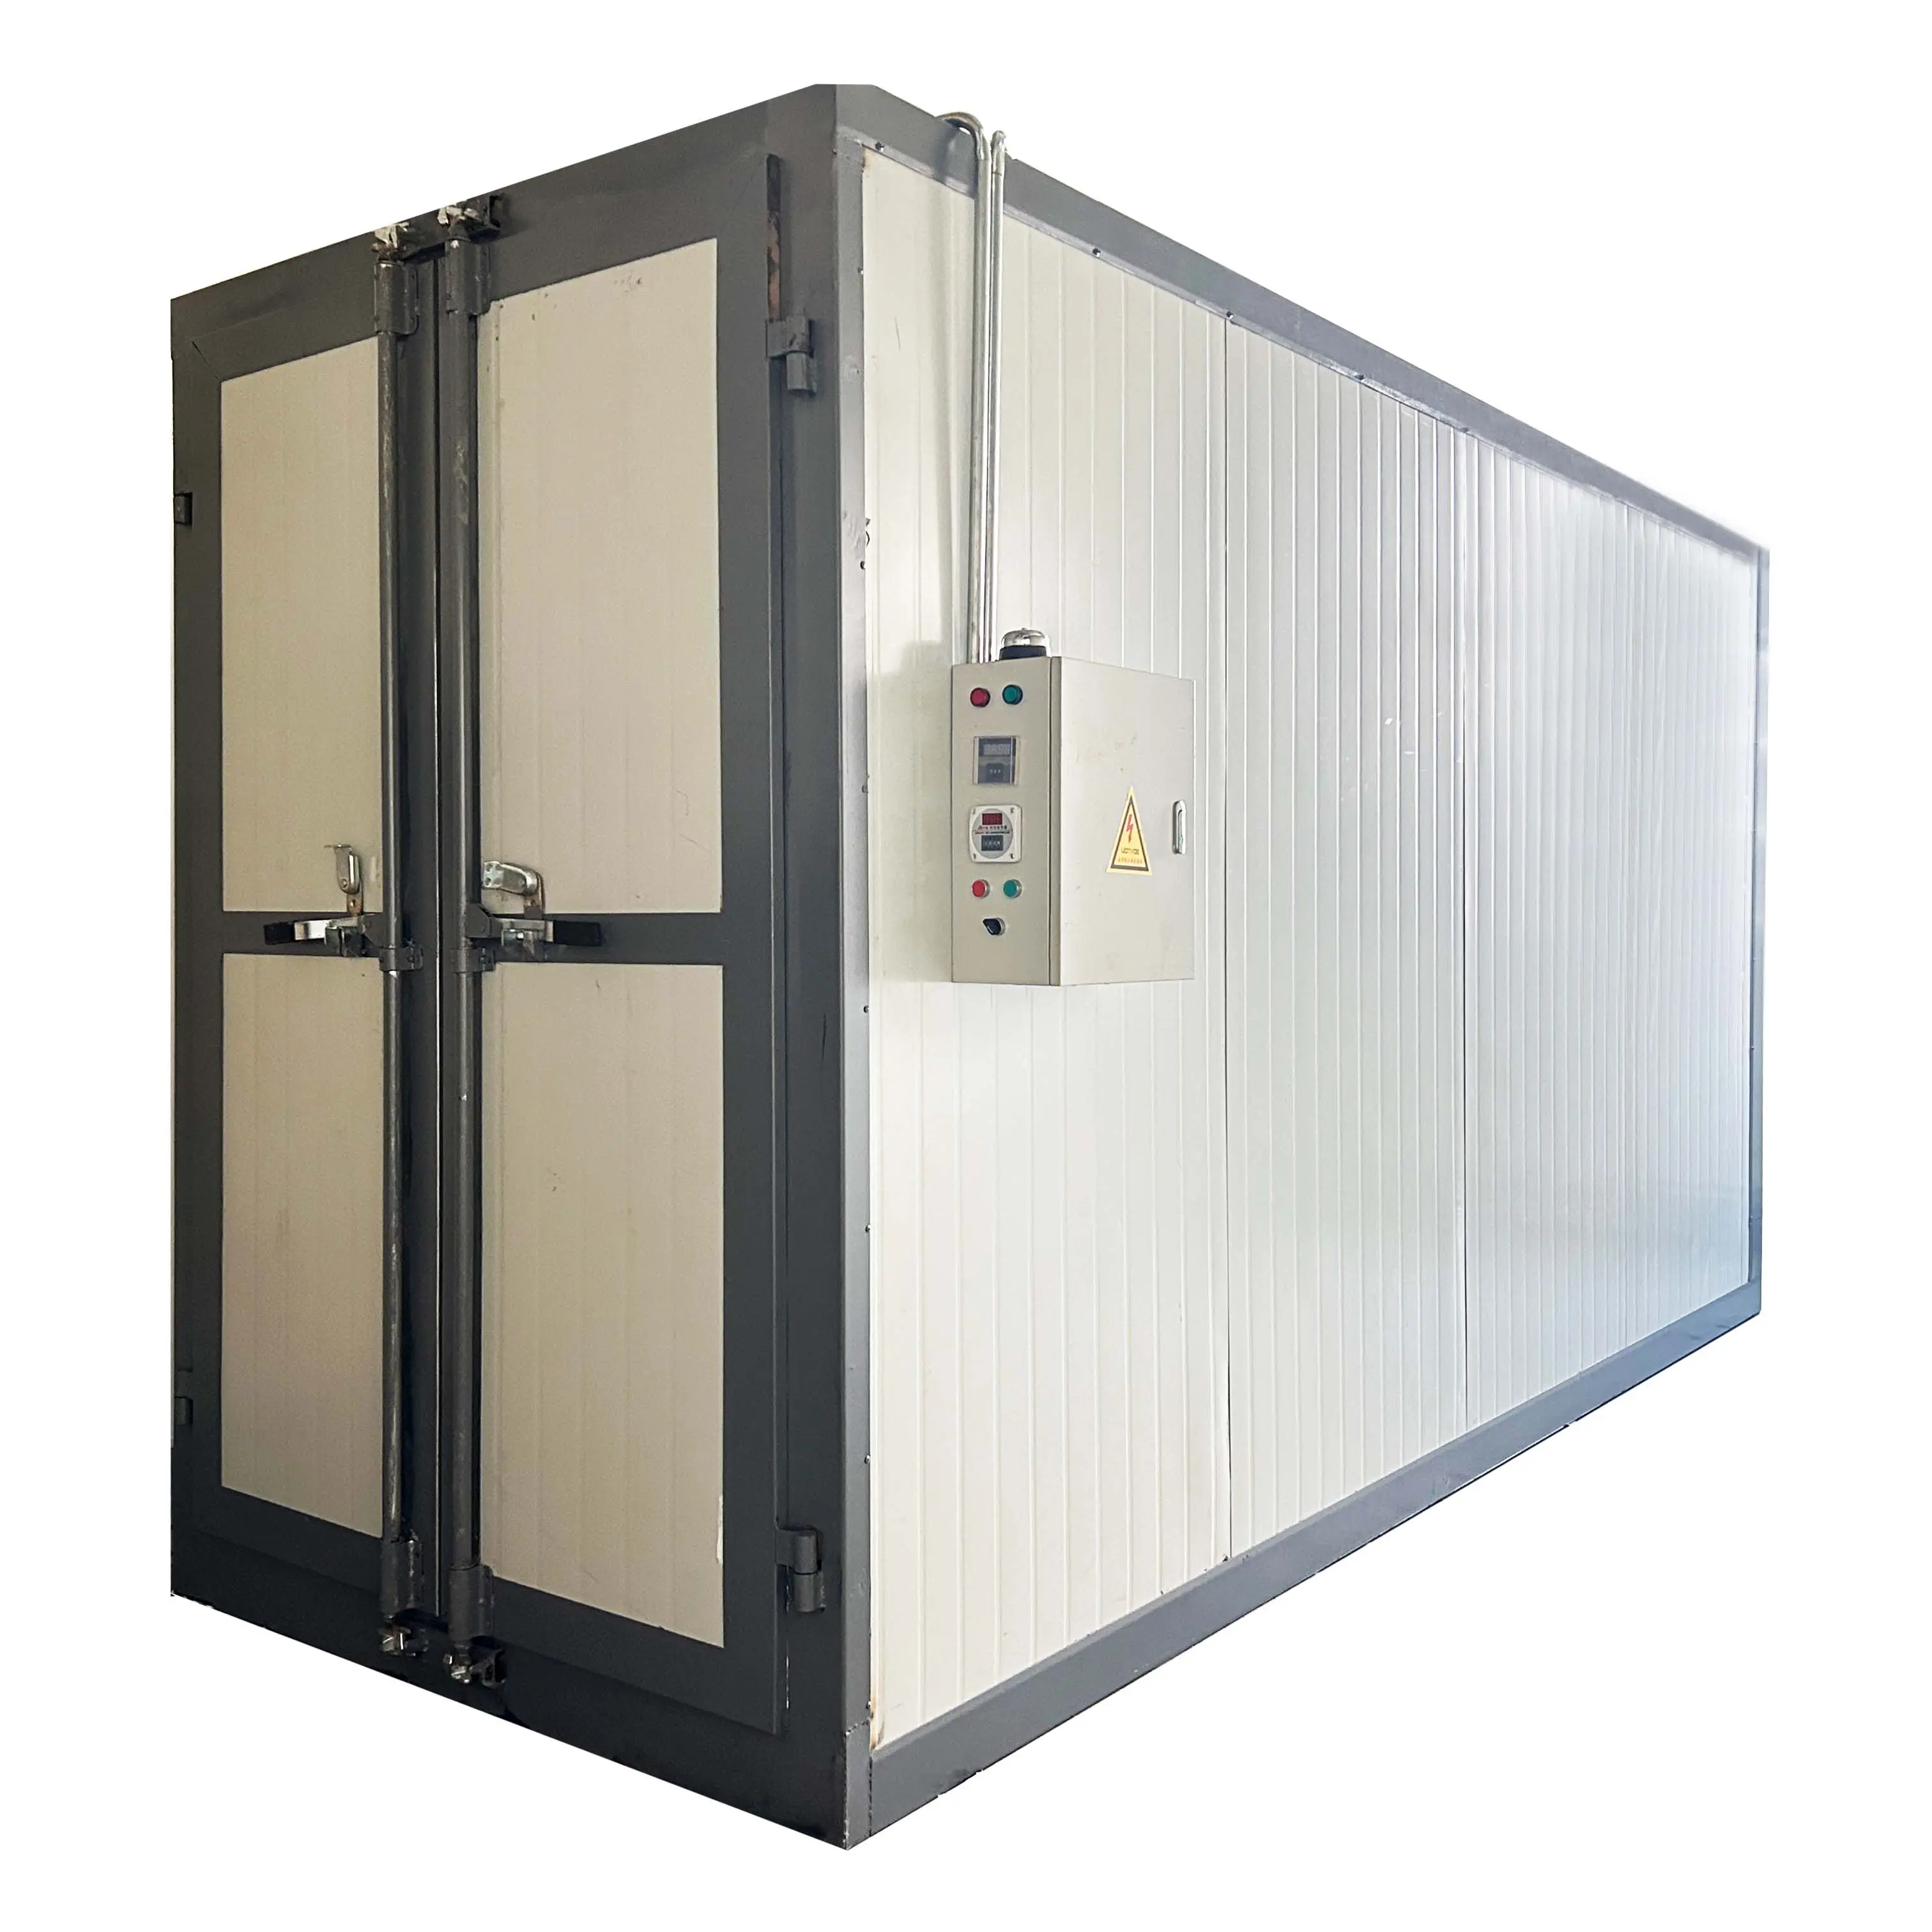 AILIN Large Powder Coating Paint Curing Oven